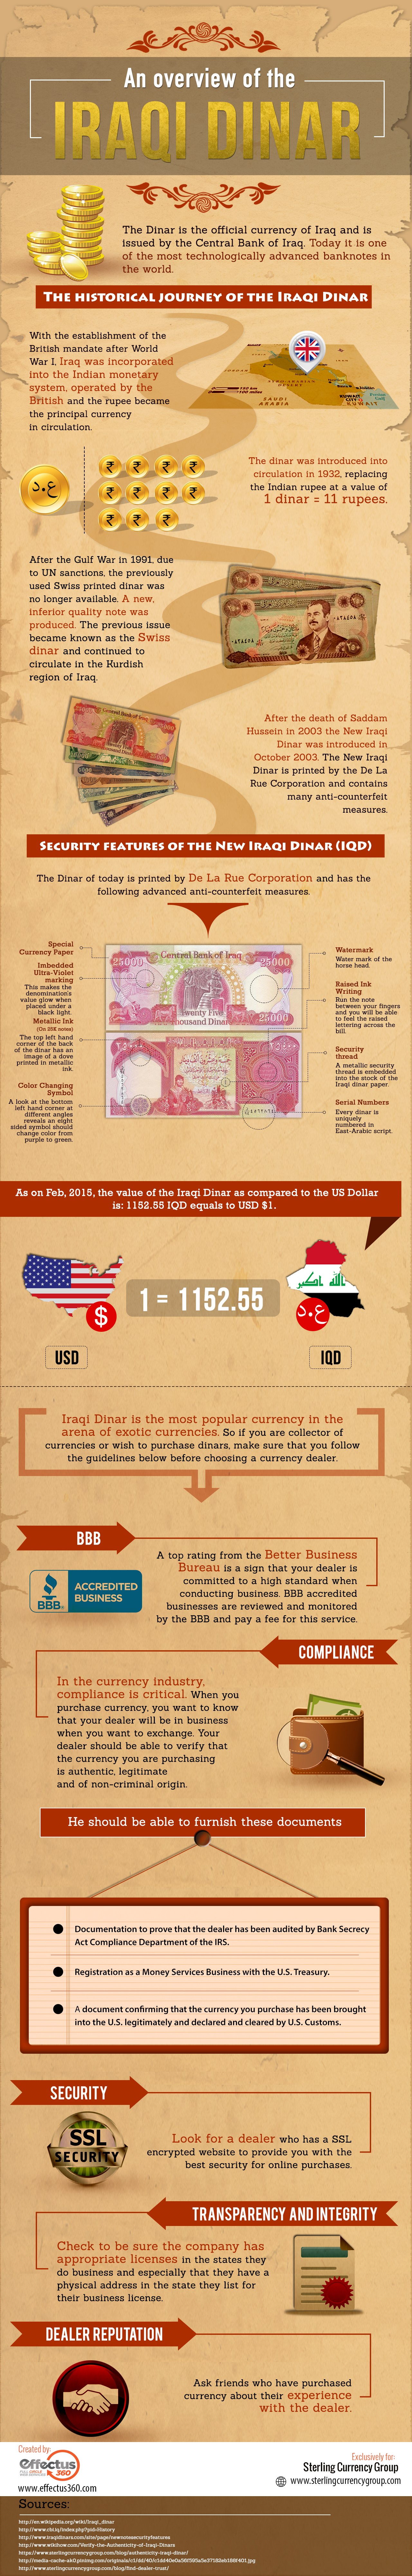 An overview of the Iraqi Dinar by Sterling Currency Group